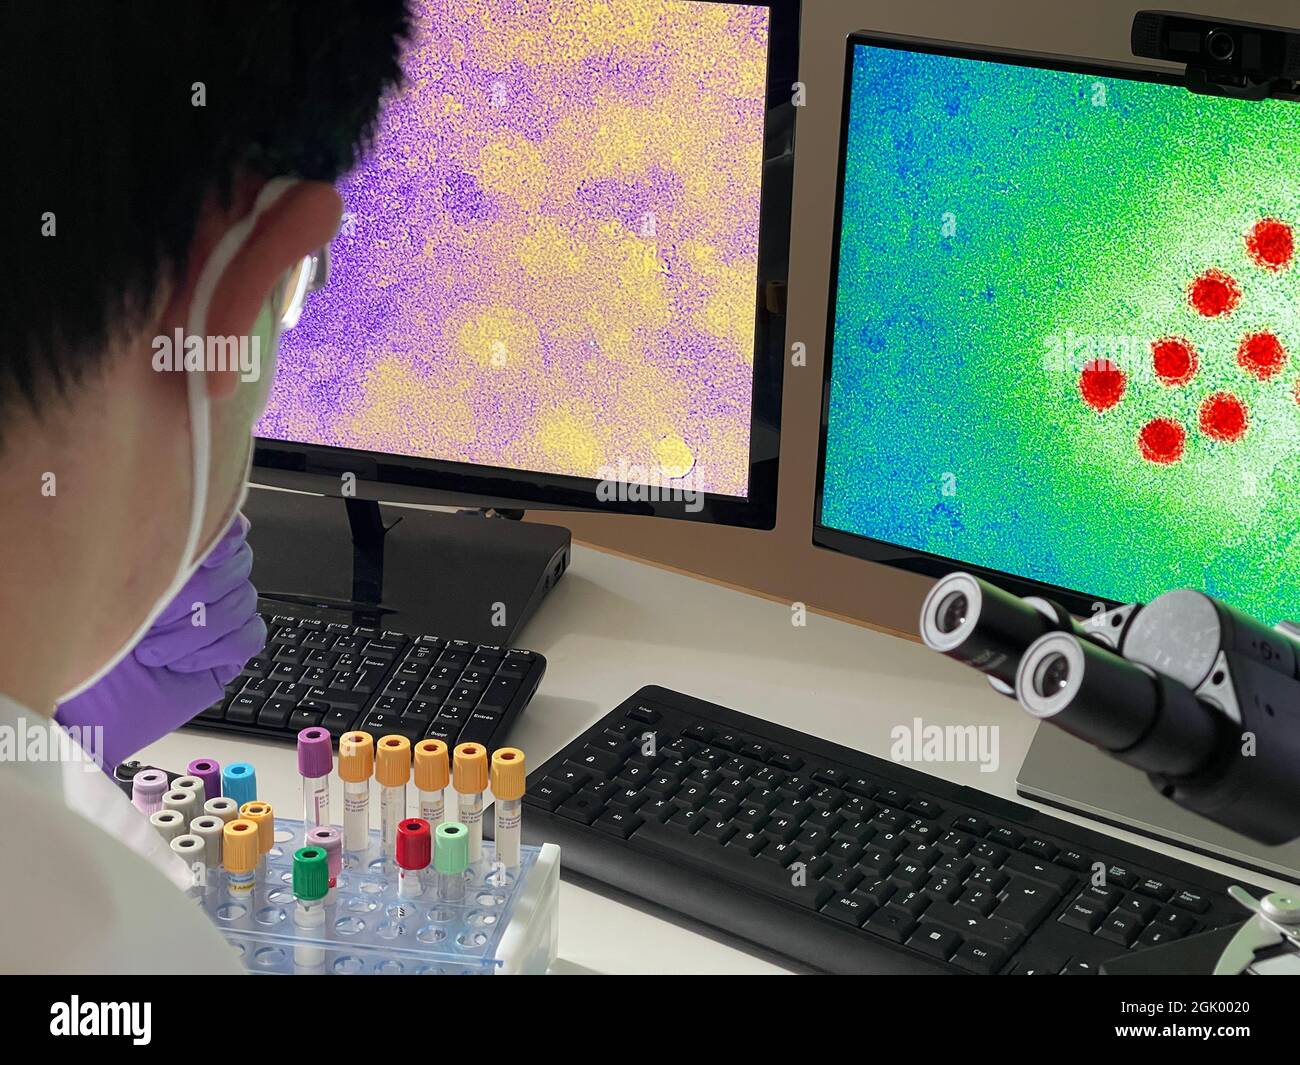 Laboratory technician doing research with images of hepatitis A virus on computer. Stock Photo